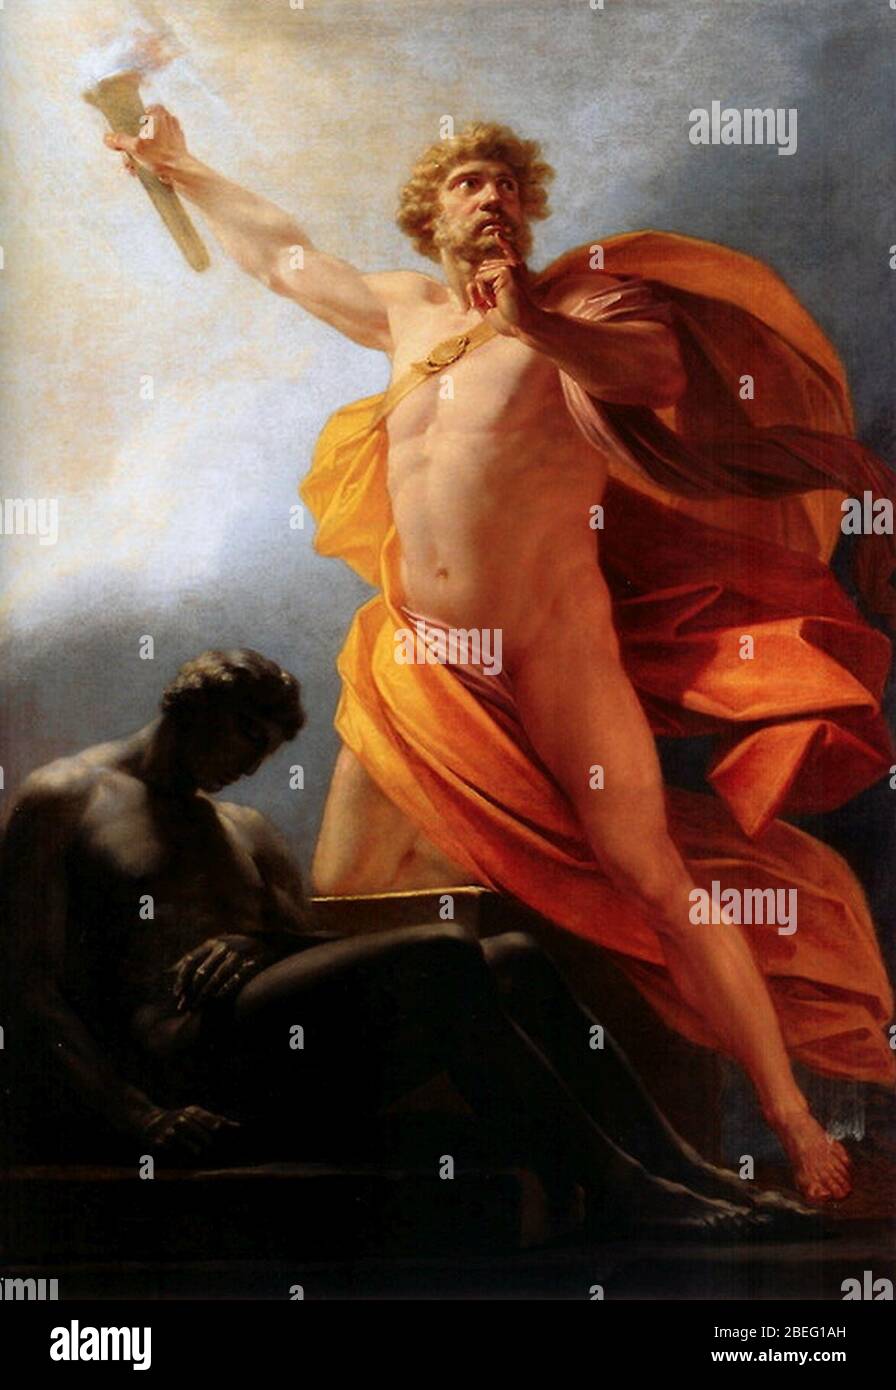 Heinrich fueger 1817 prometheus brings fire to mankind. Stock Photo